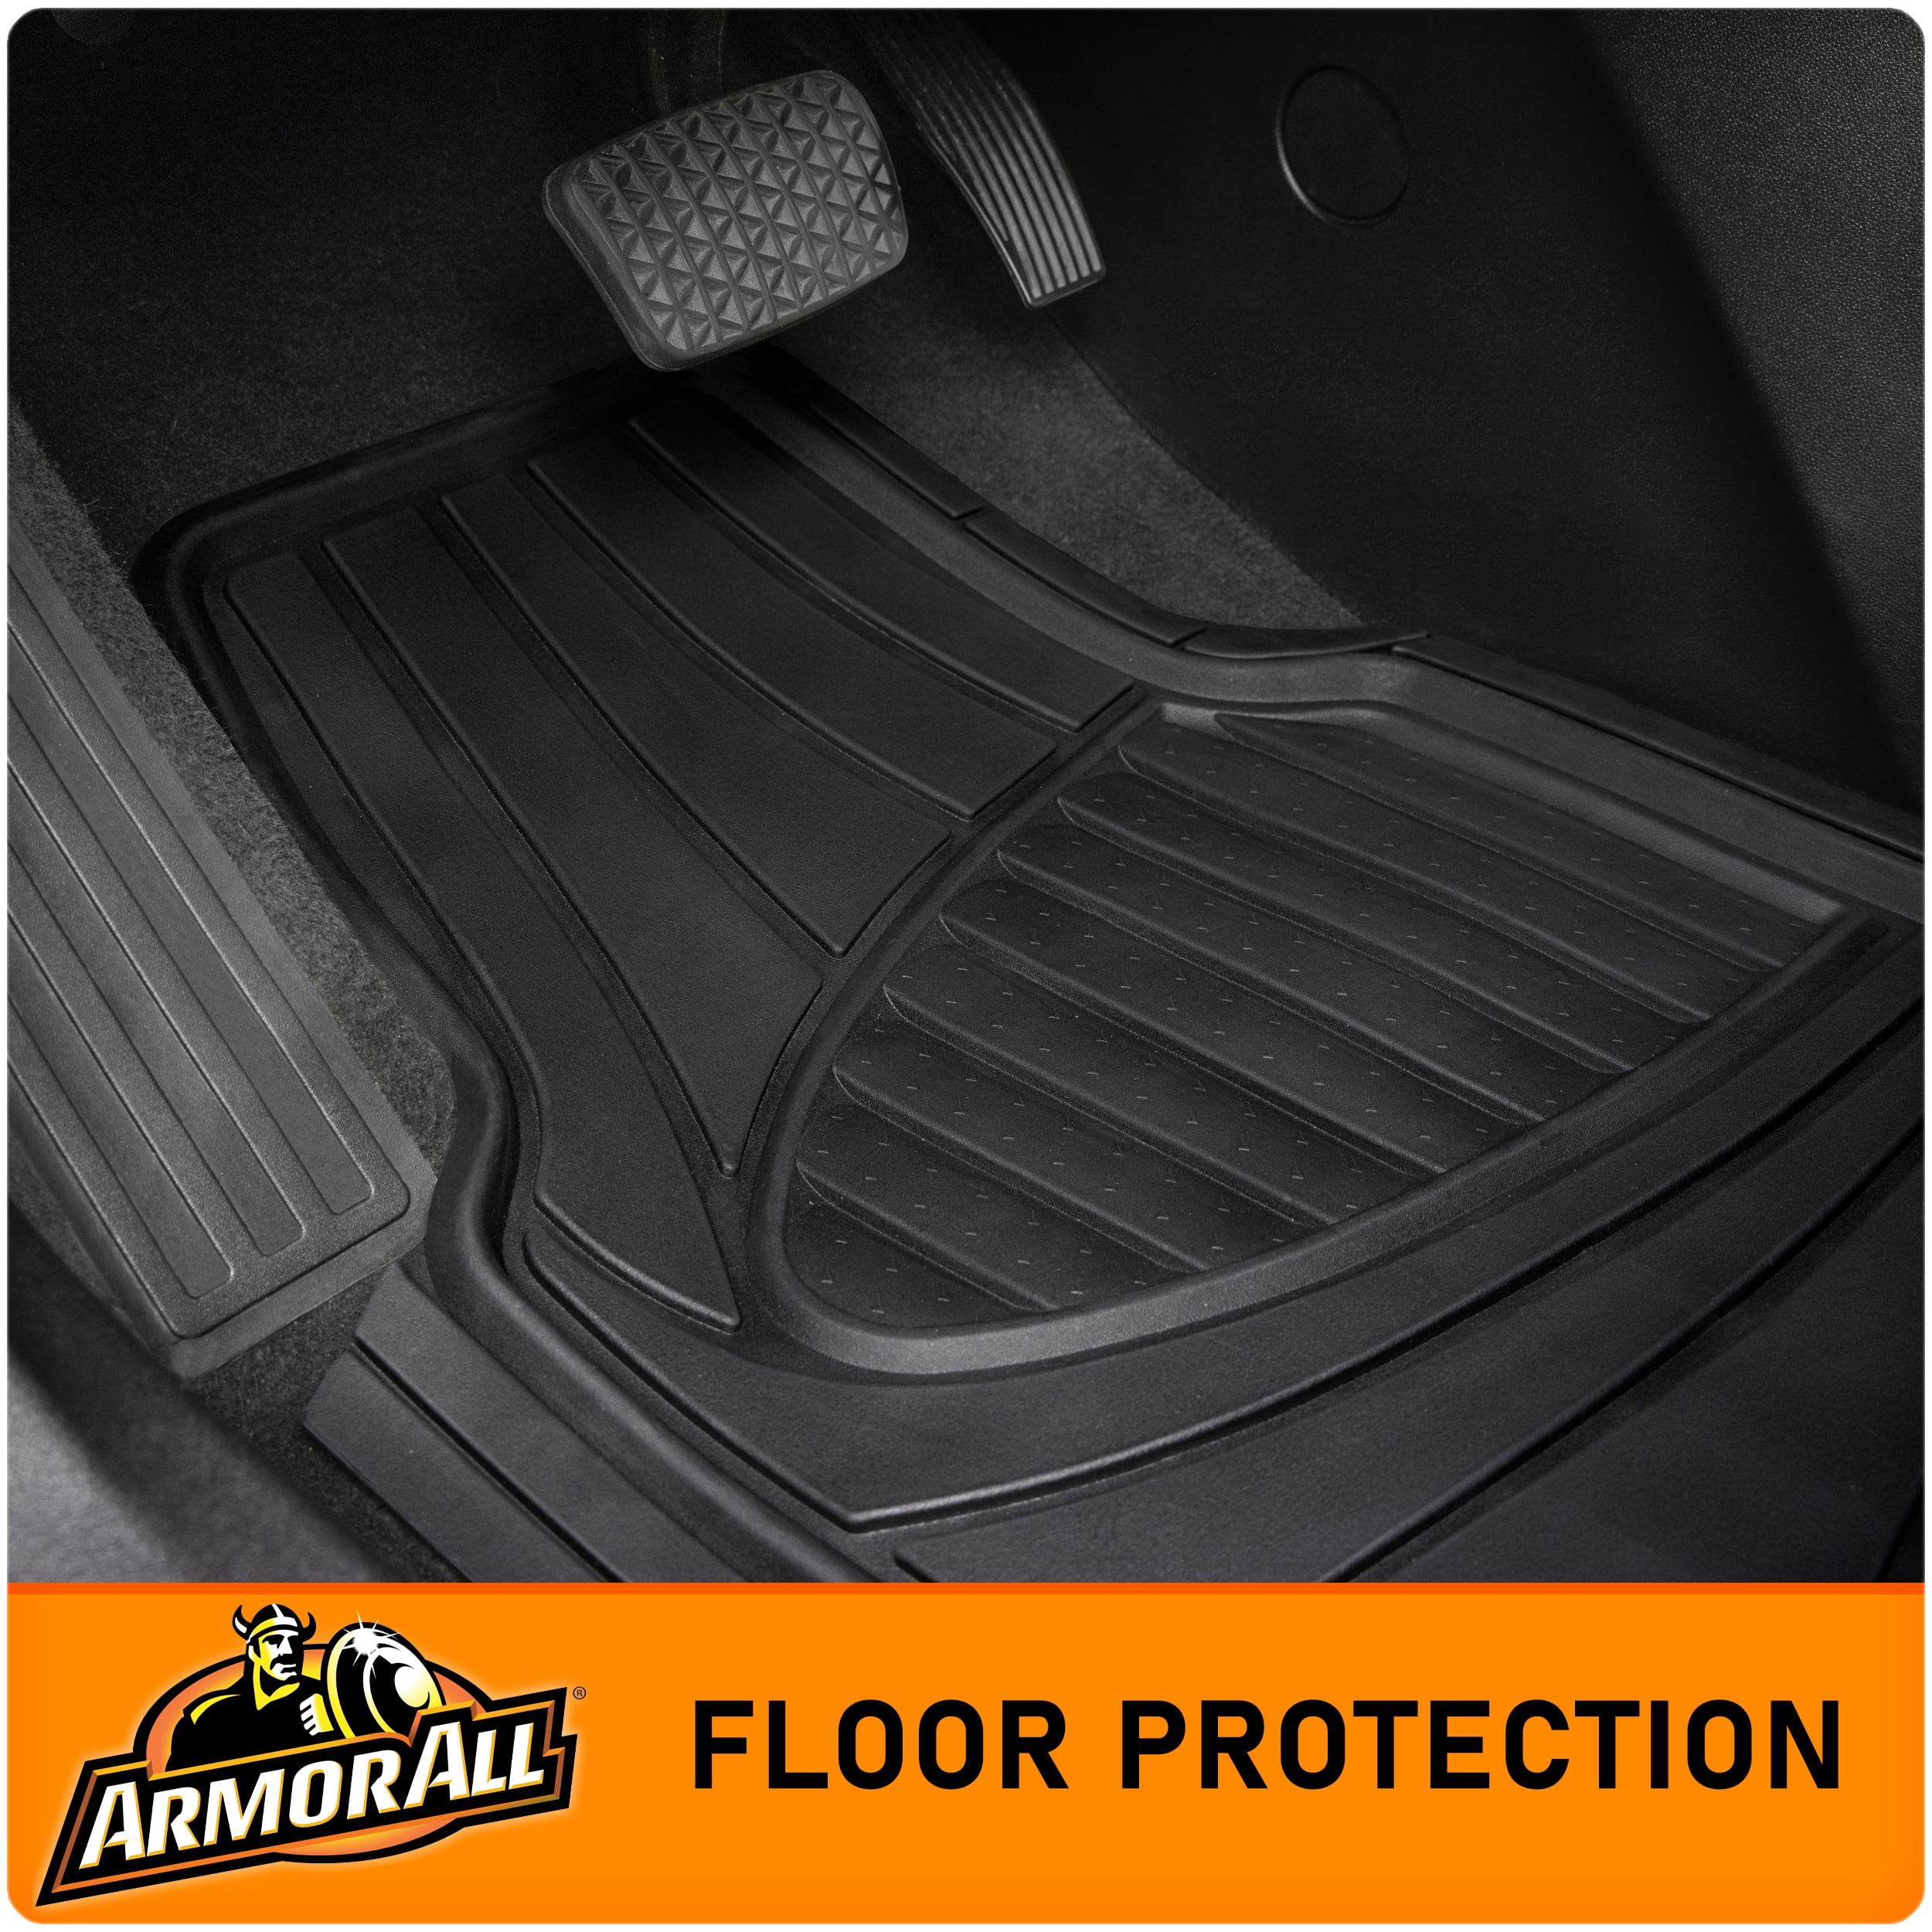 Armor All 4-Piece Black Rubber Car, Truck, SUV Floor Mats, All Weather  Protection, Auto, Universal, Custom, Set, Front, Back 